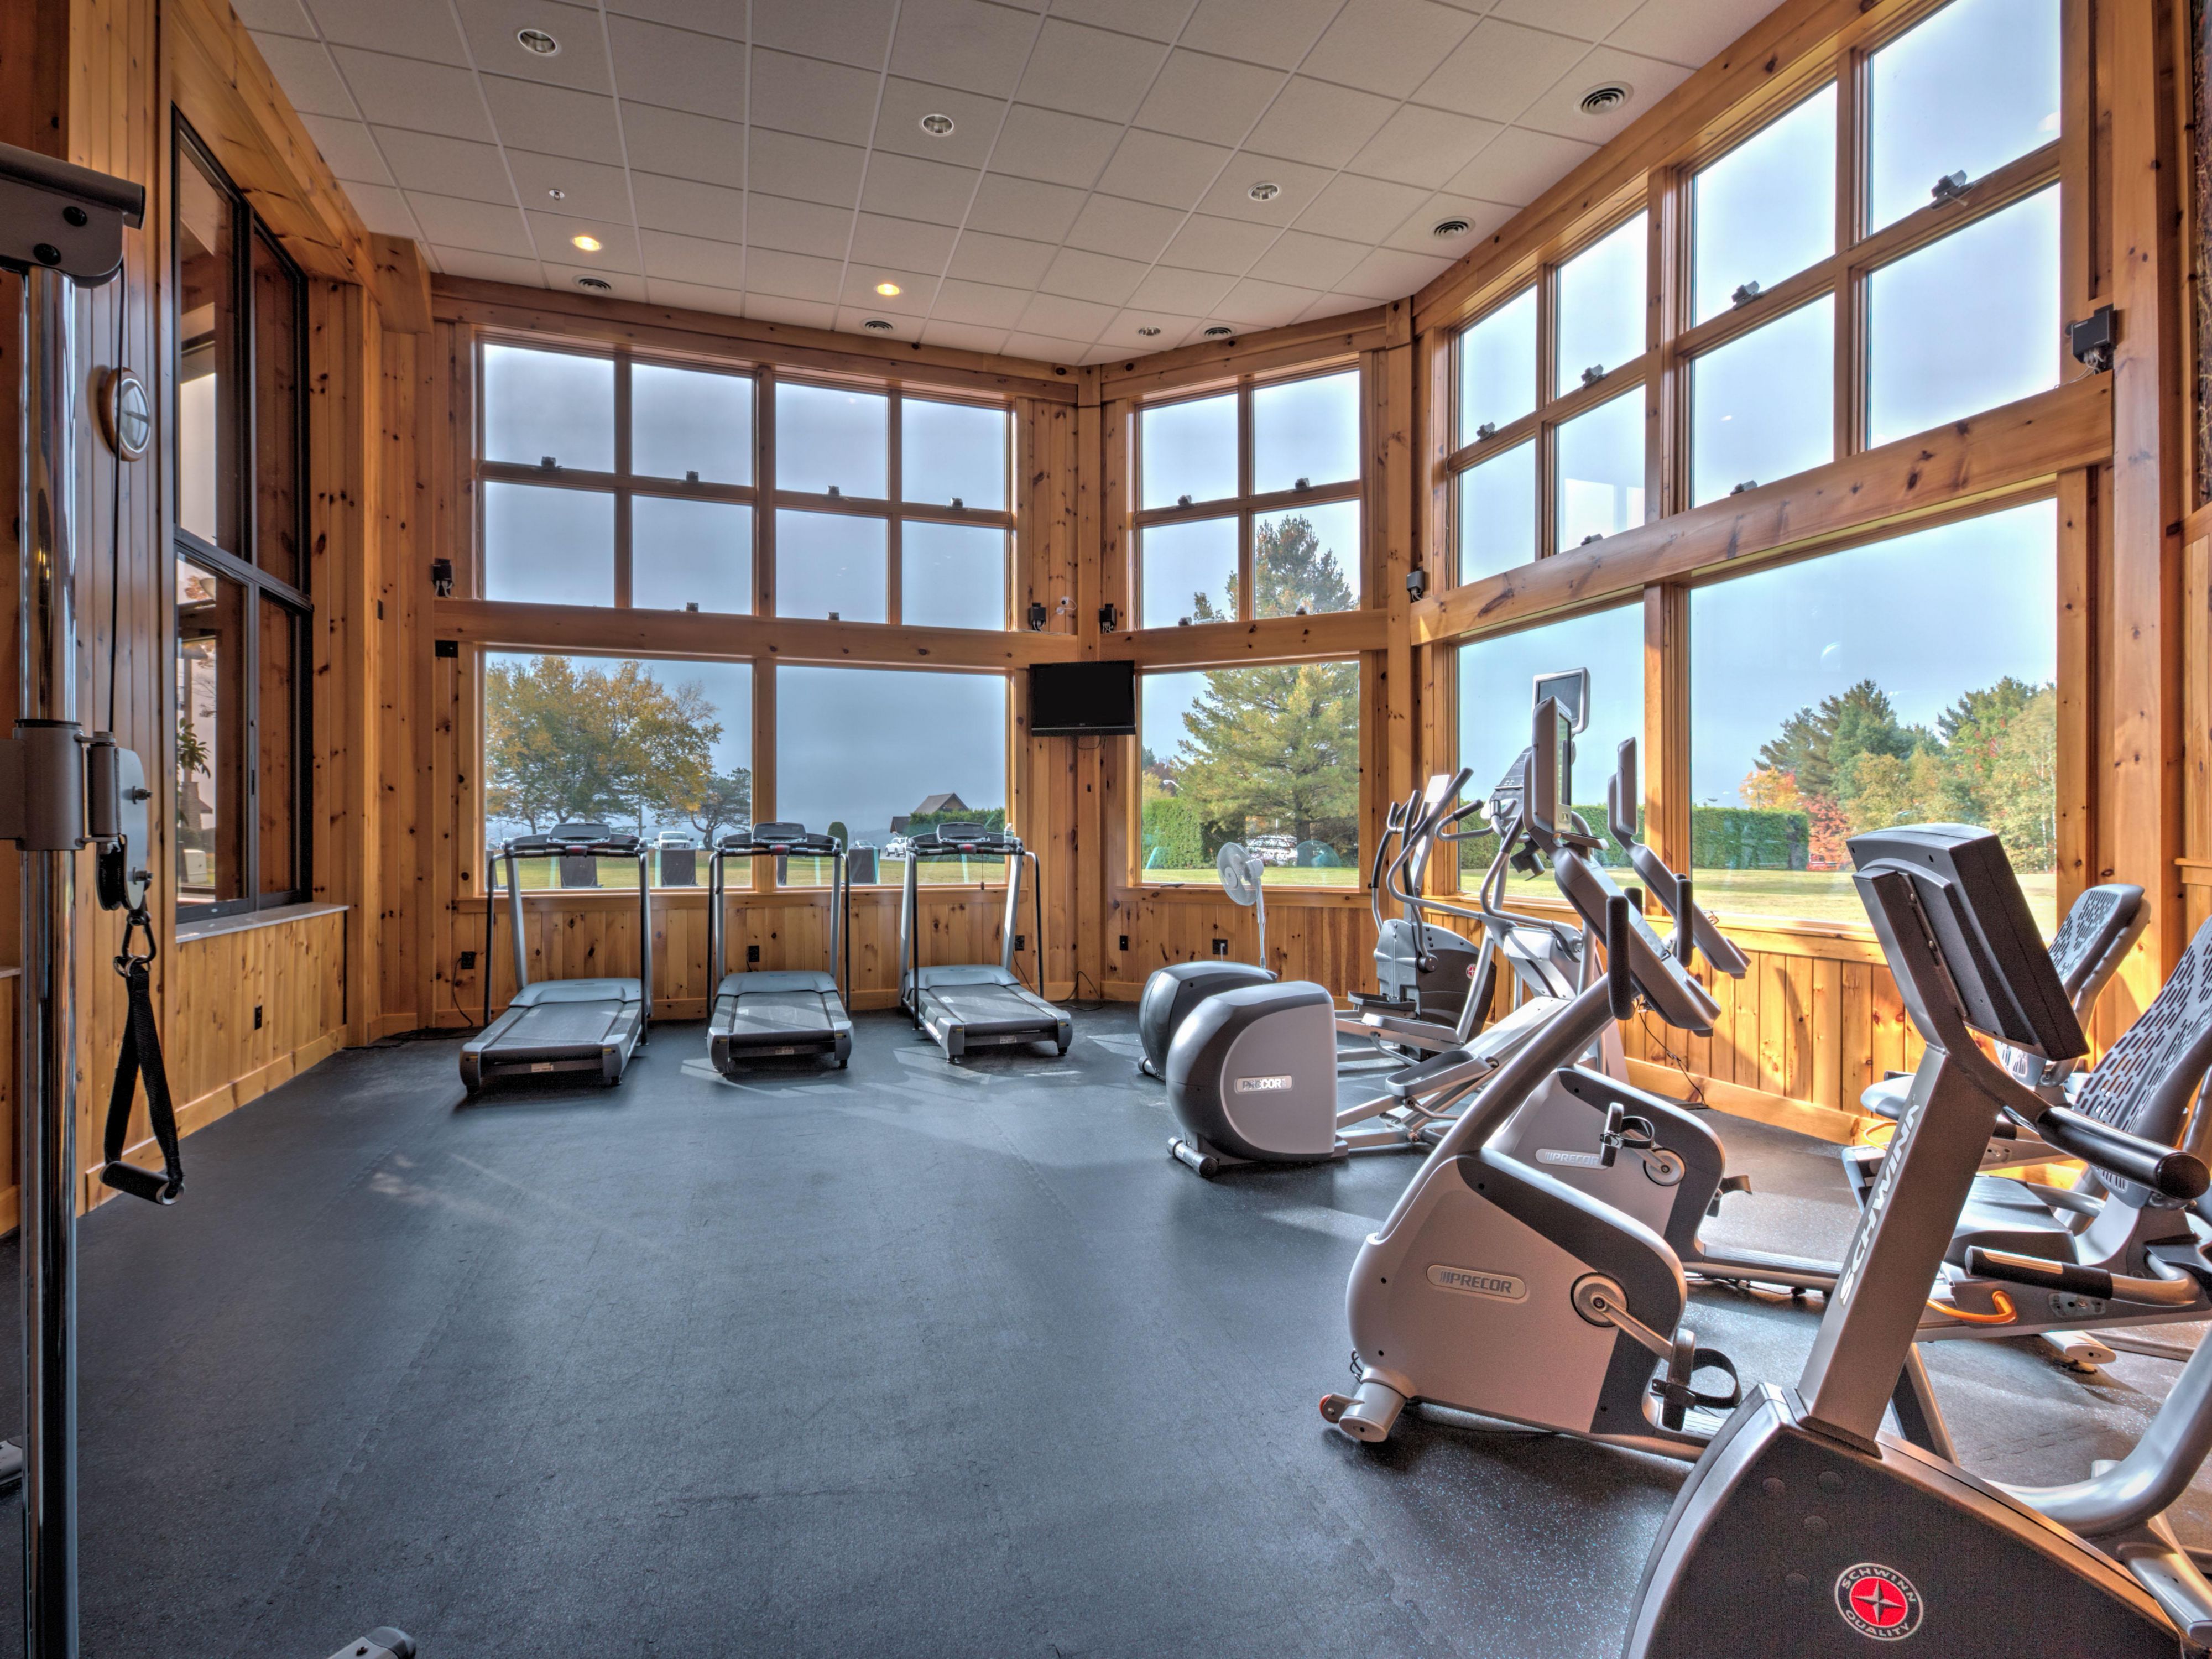 Maintaining your routine while traveling is important. Our fitness room has 3 treadmills, 1 stair stepper, 1 elliptical machine, 2 recumbent stationary bikes, free weights, fitness weight station, weight bench, floor mat, 3 fitness balls - all while overlooking Adirondack High Peaks.